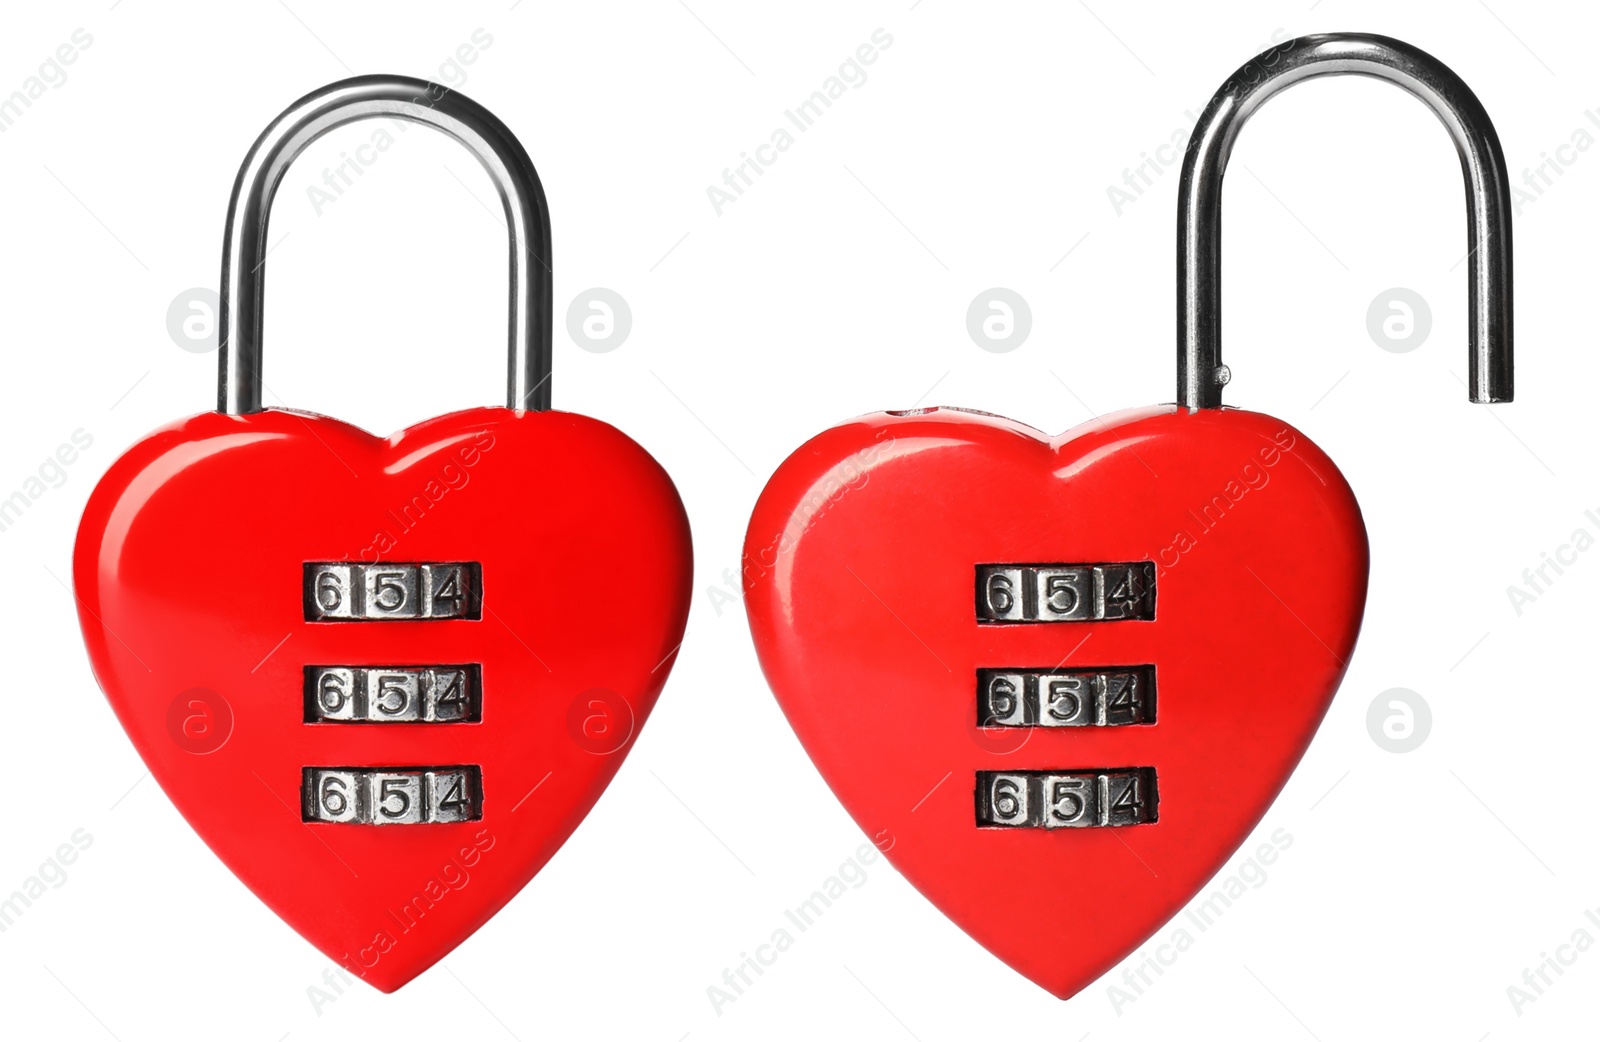 Image of Locked and open heart shaped padlocks on white background, collage